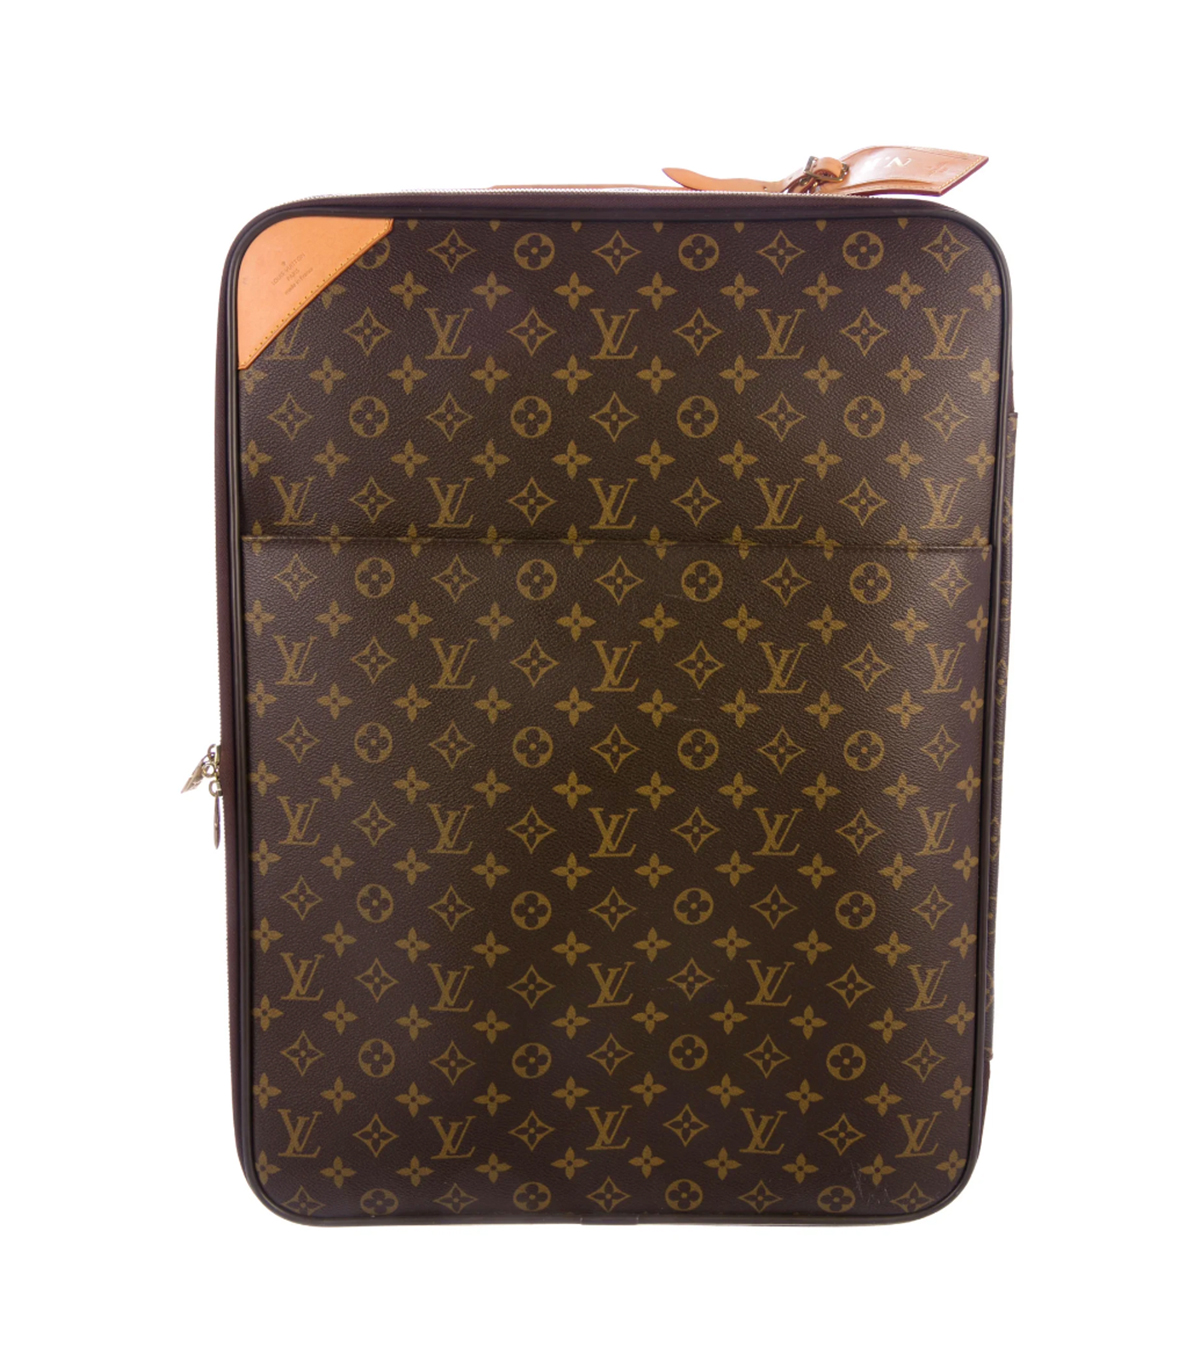 Vej Modtager Centrum How to Shop Affordable Louis Vuitton Luggage | Who What Wear